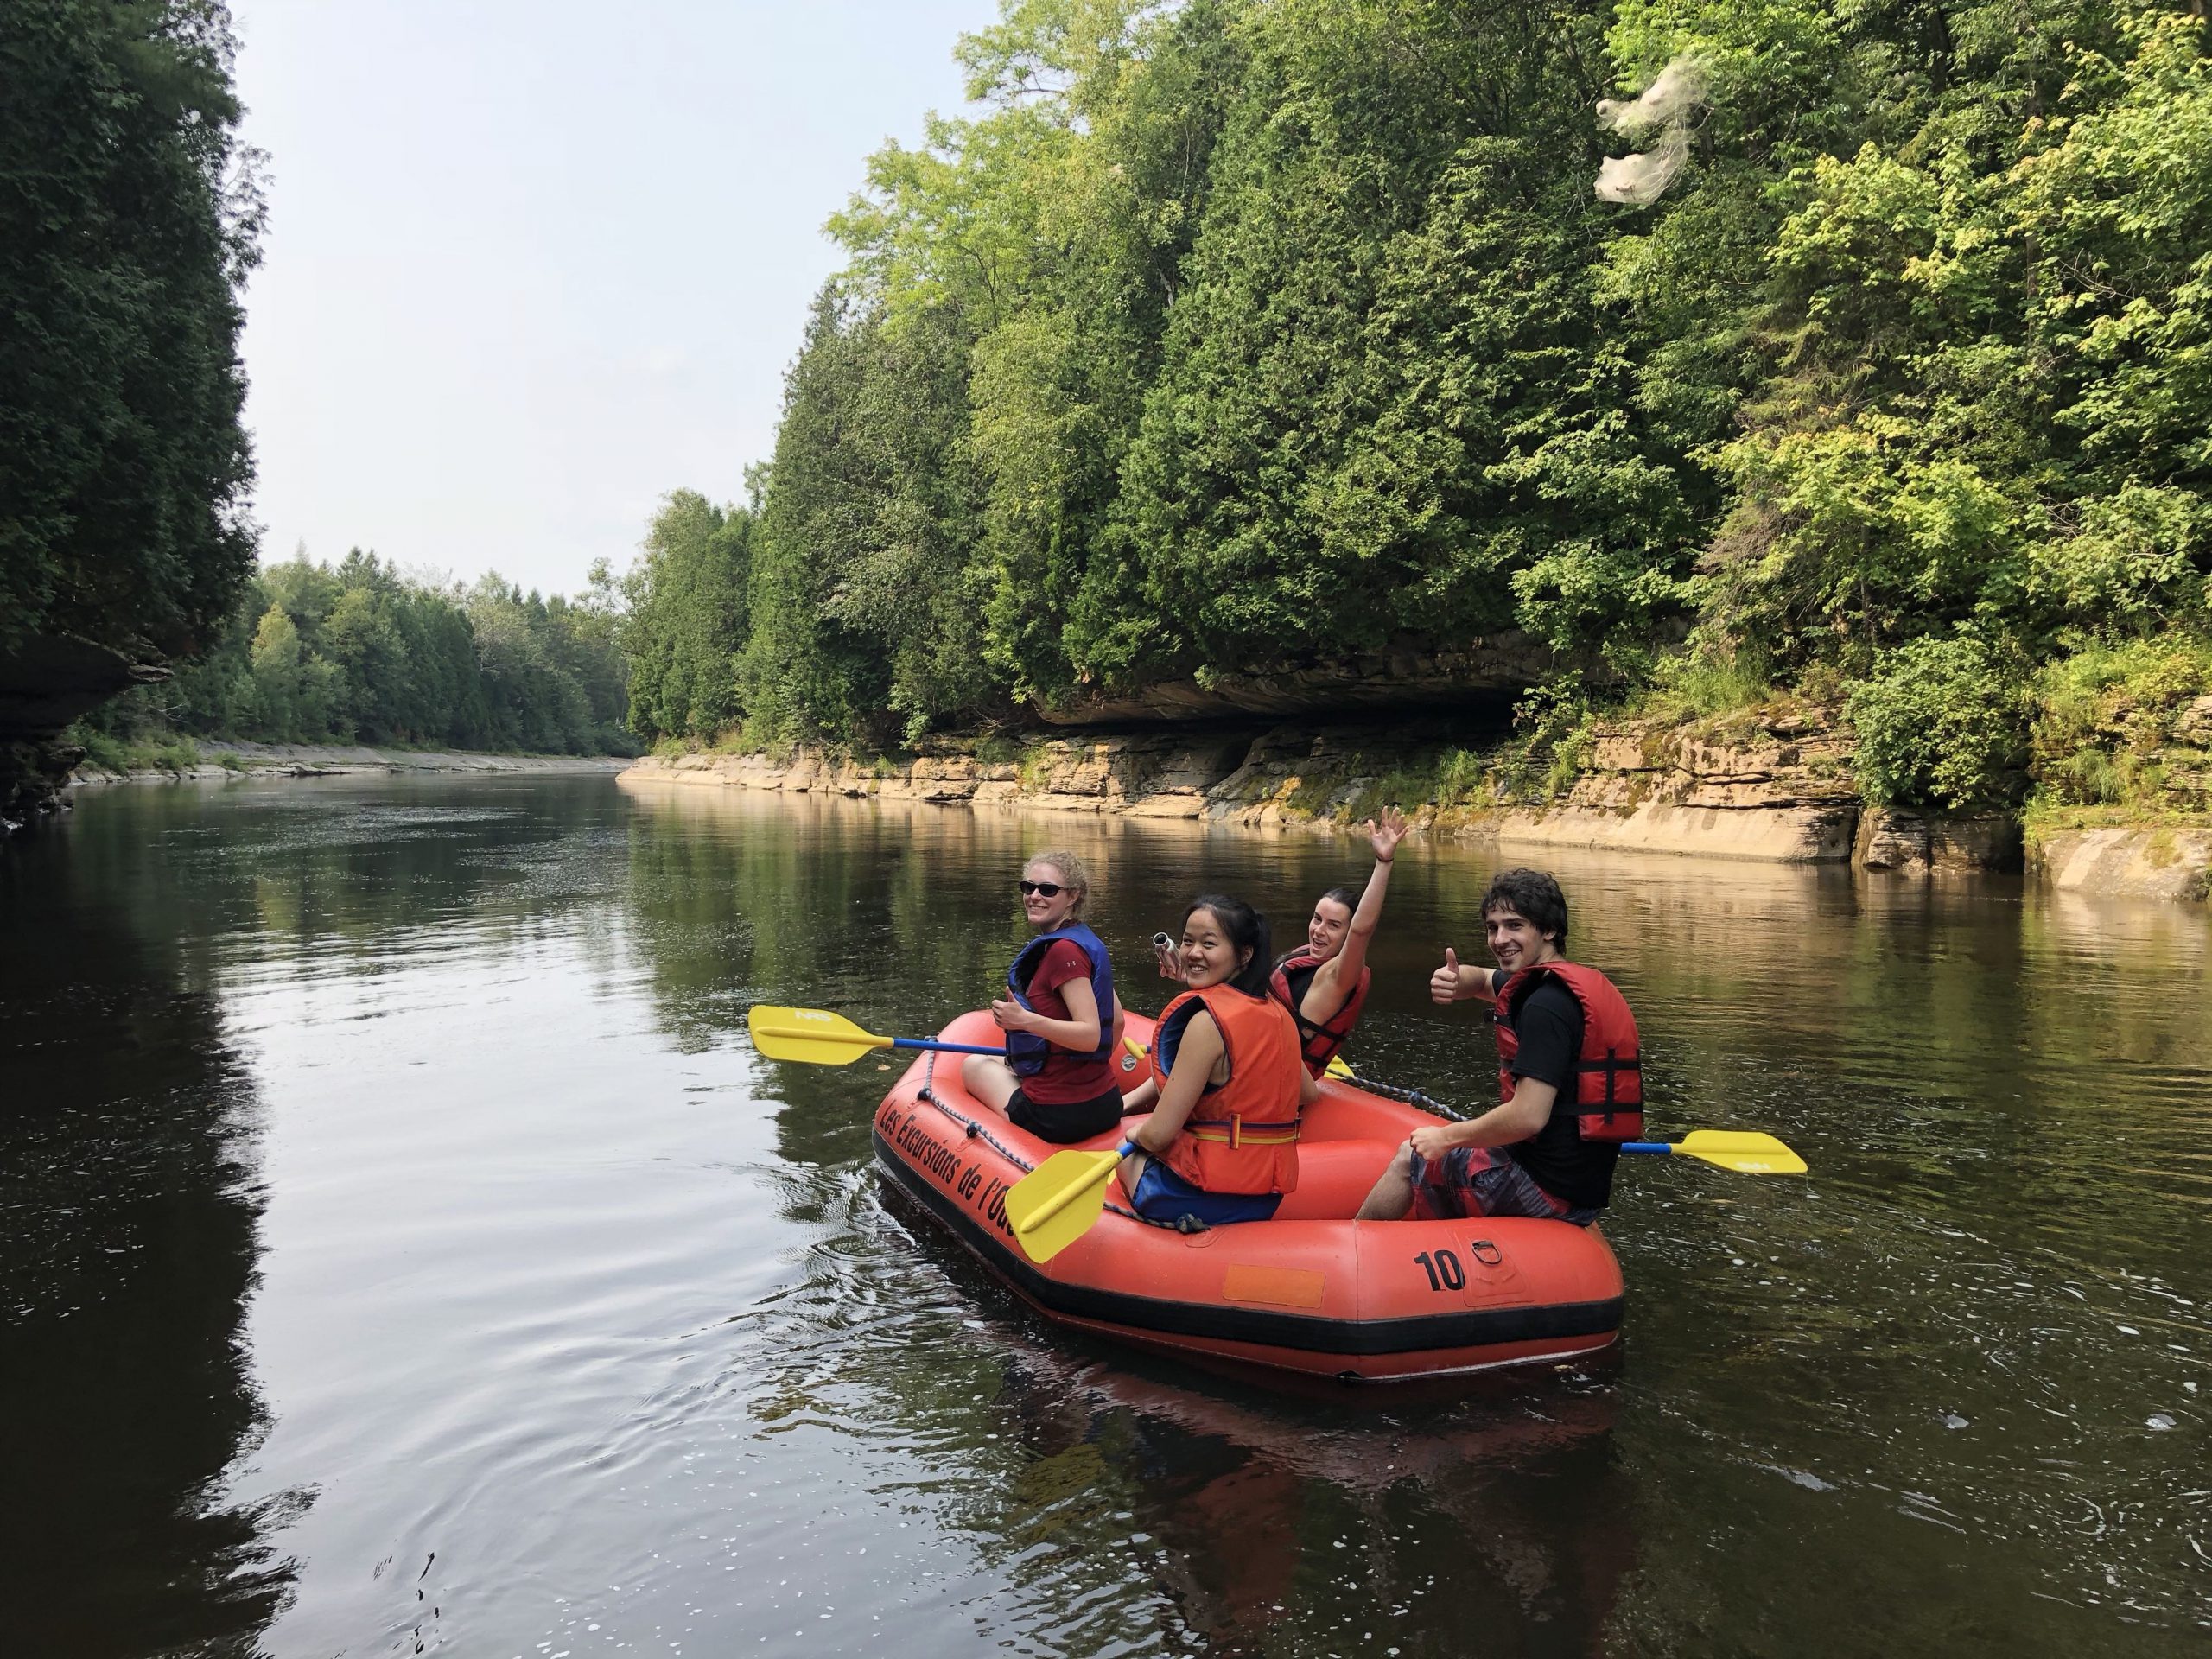 Rafting with interns: thank you